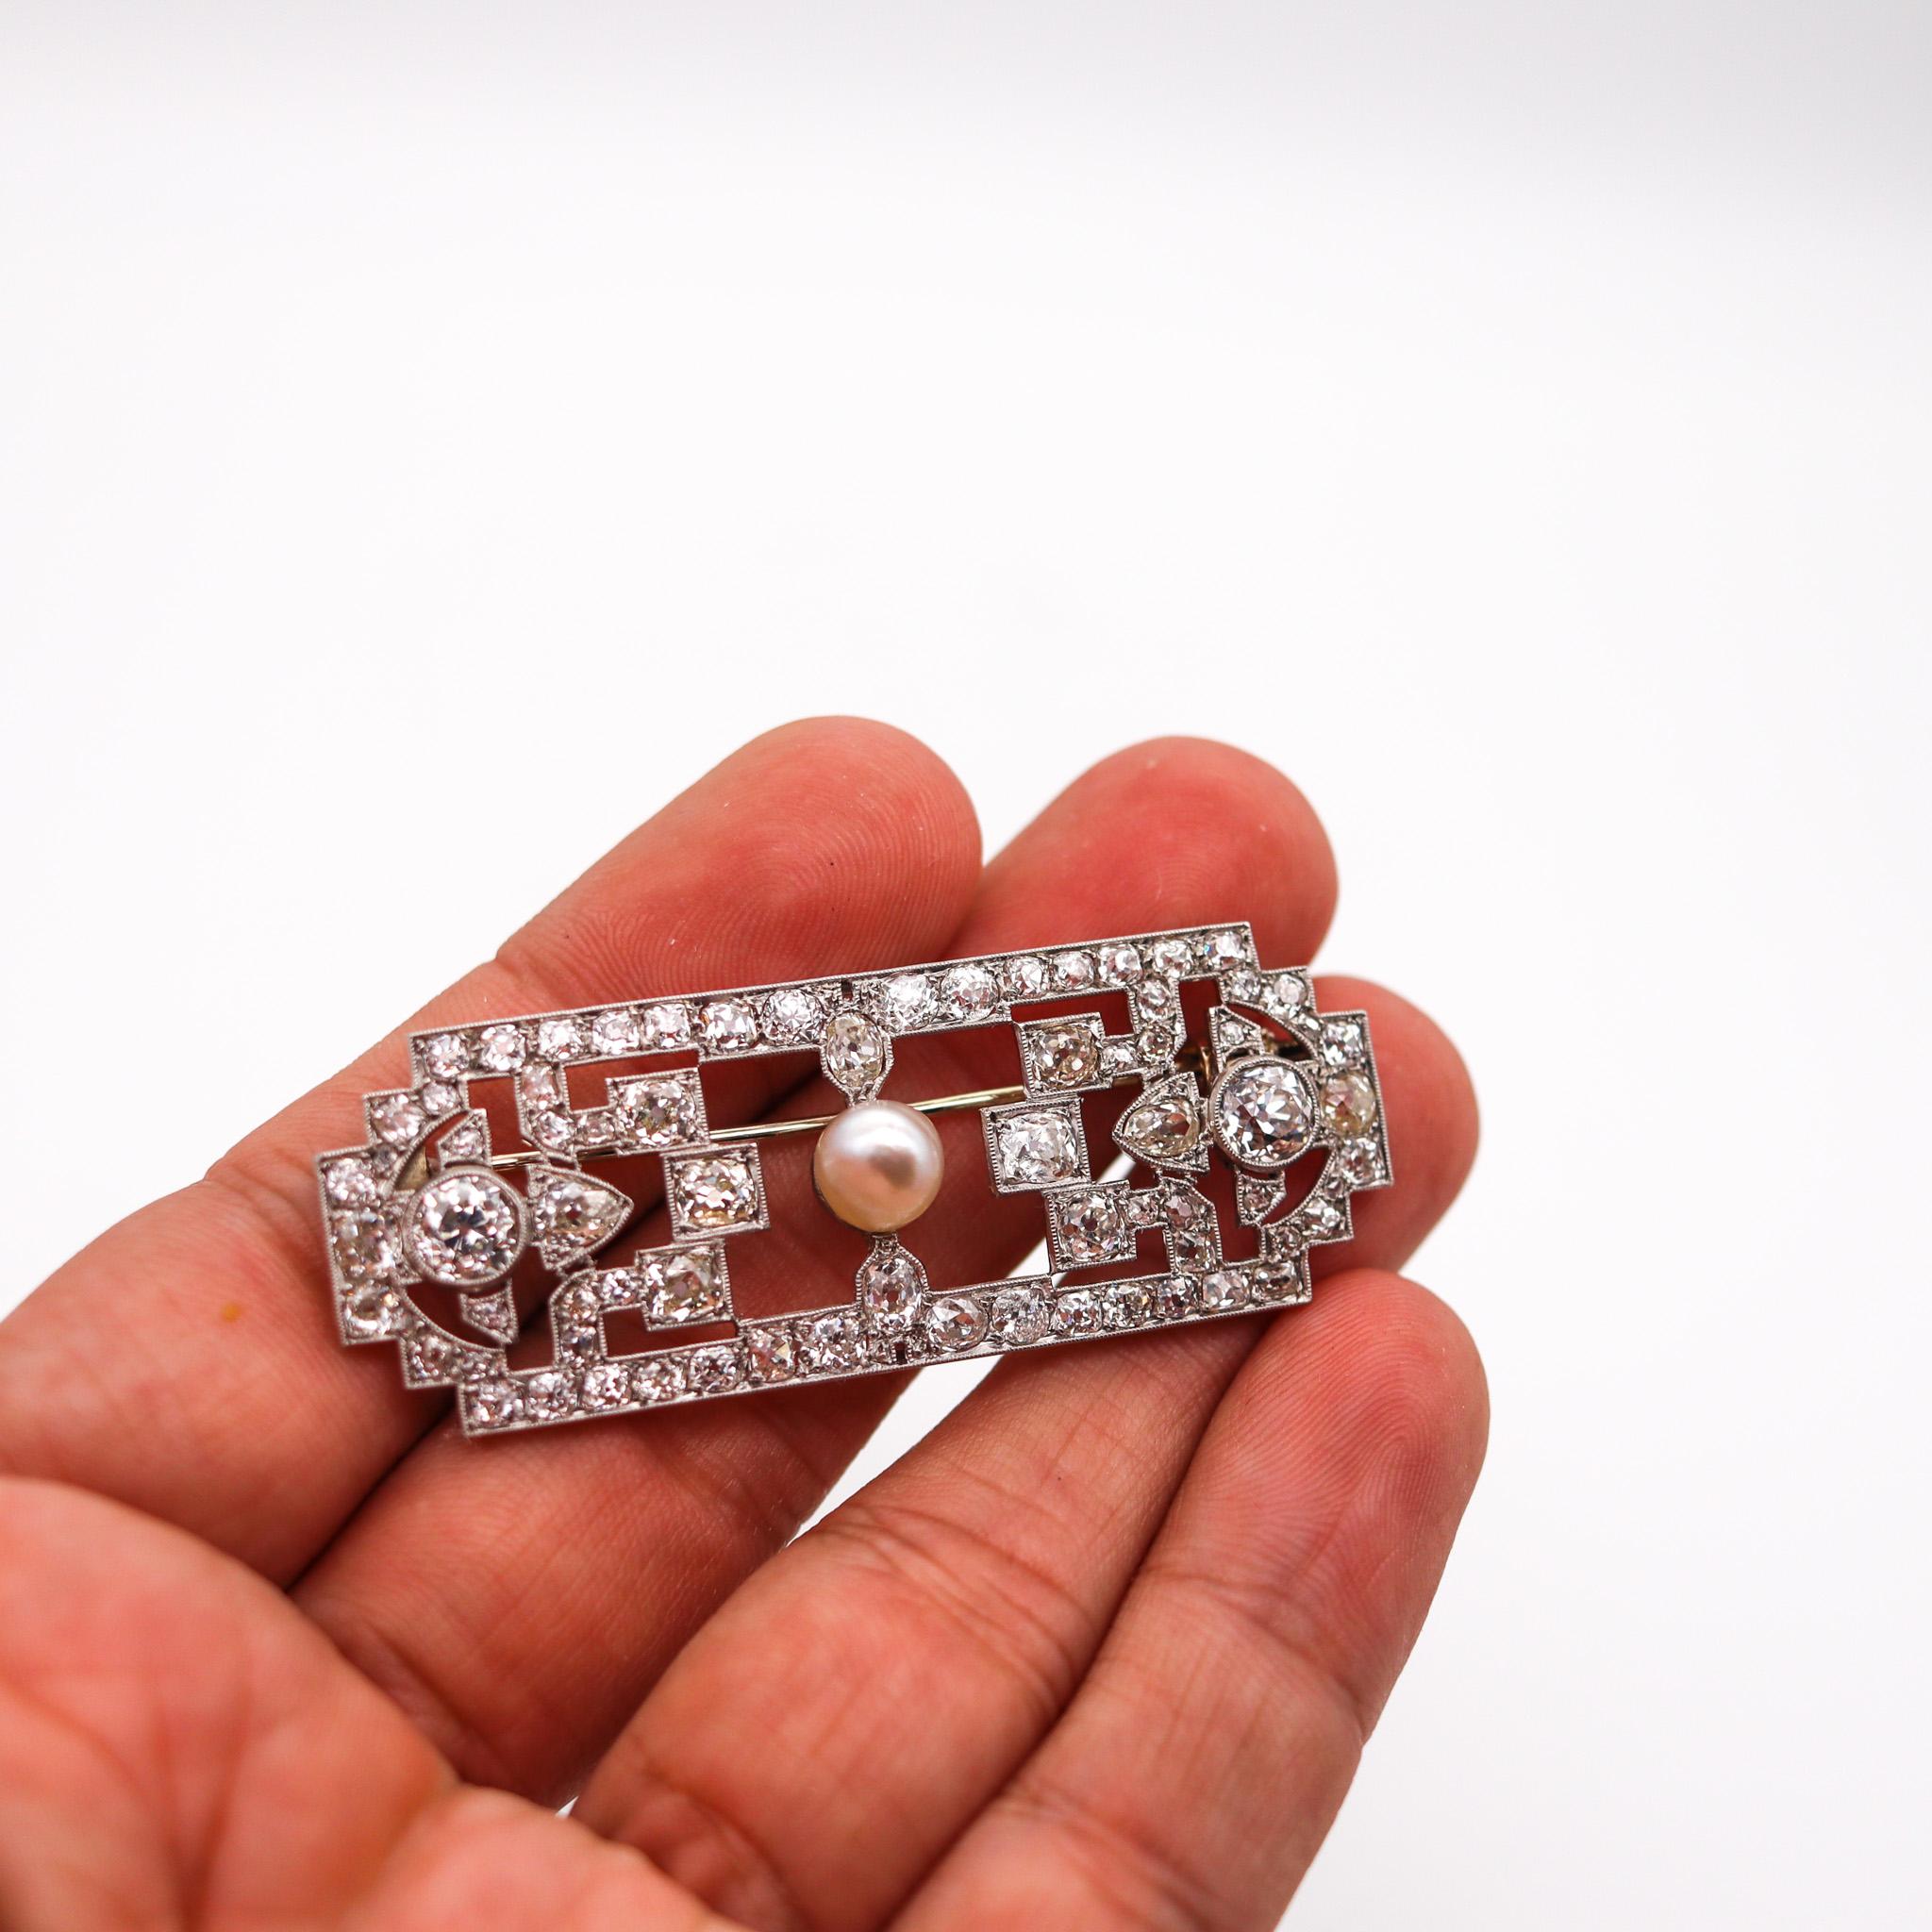 French 1920 Art Deco Geometric Brooch in Platinum with 10.70ctw in Diamonds For Sale 2